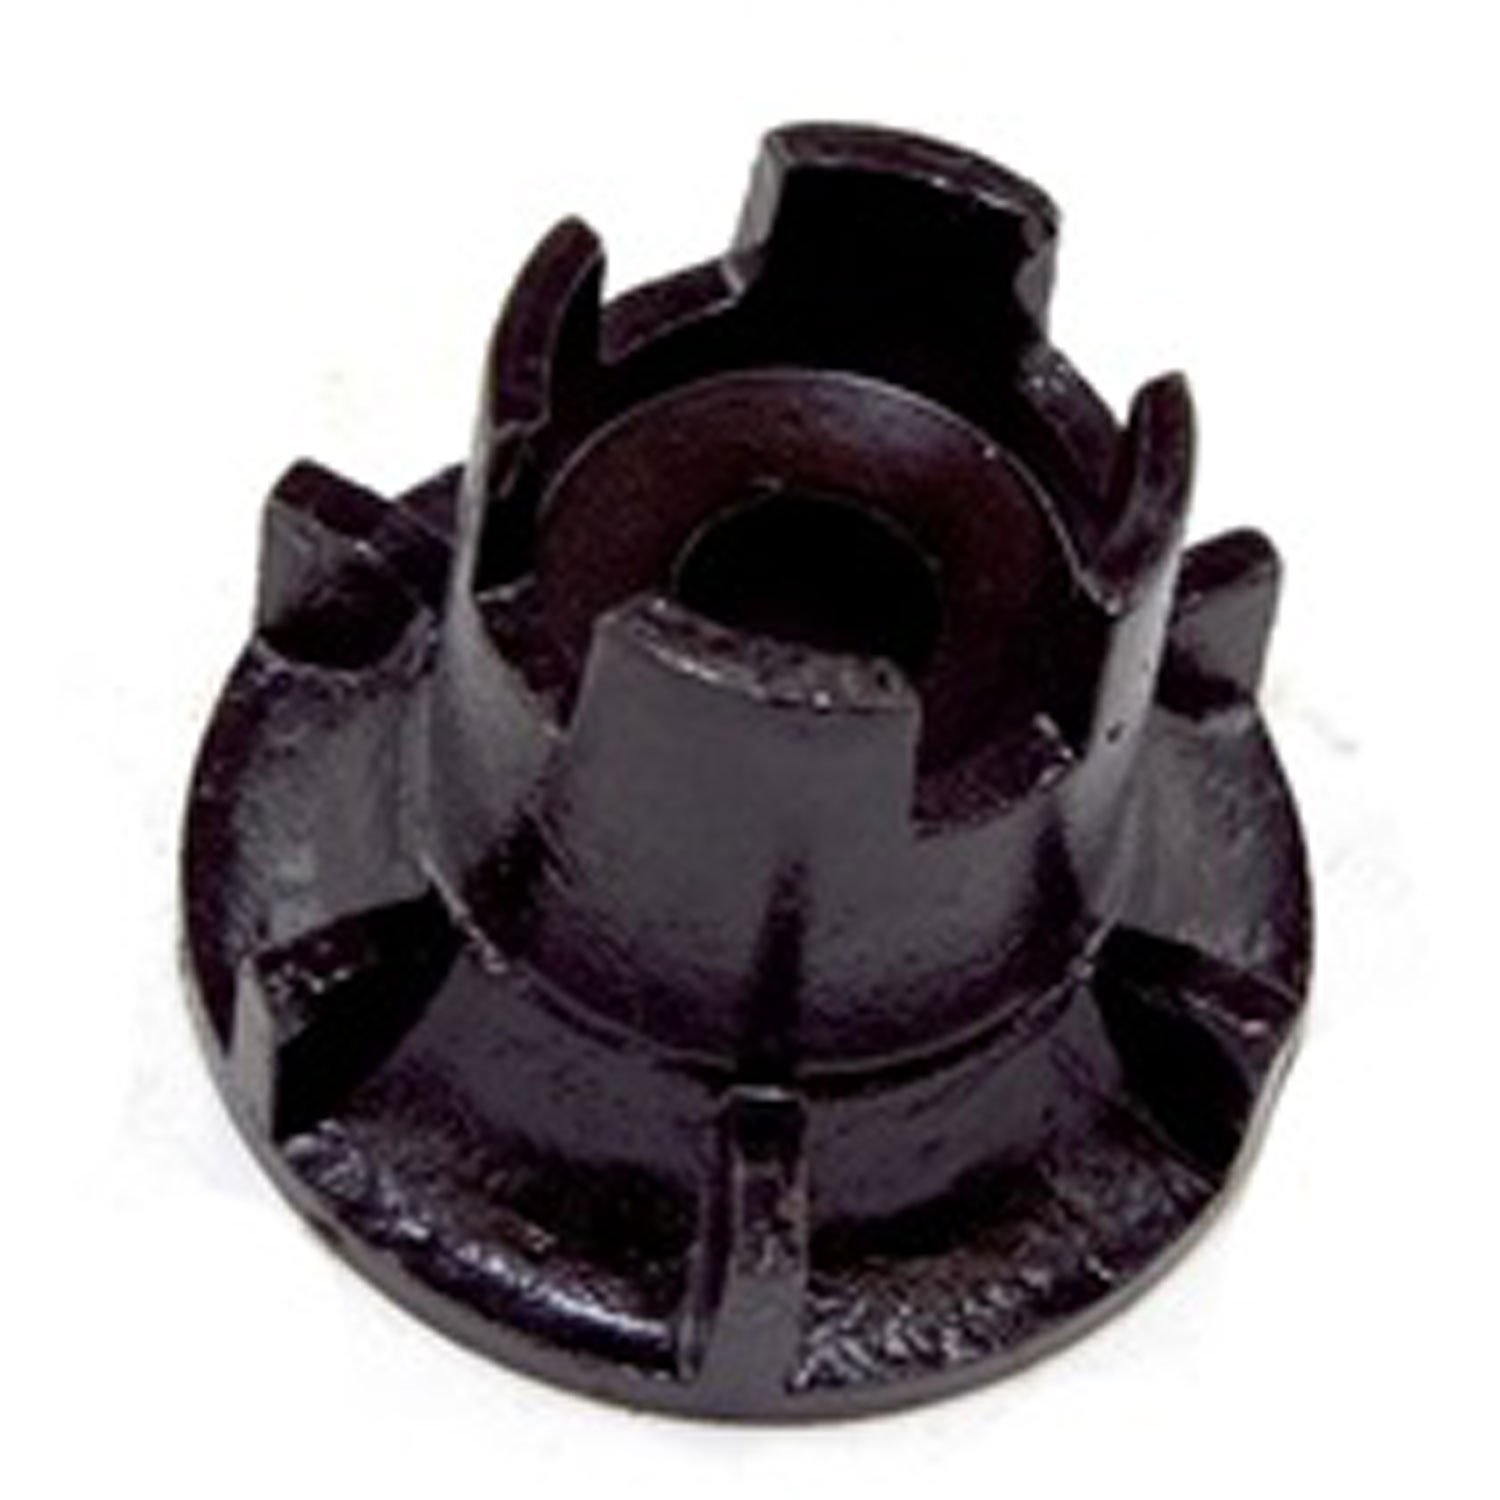 This water pump impeller from Omix-ADA fits 41-71 Ford Willys and Jeep models with 134 cubic inch engines.